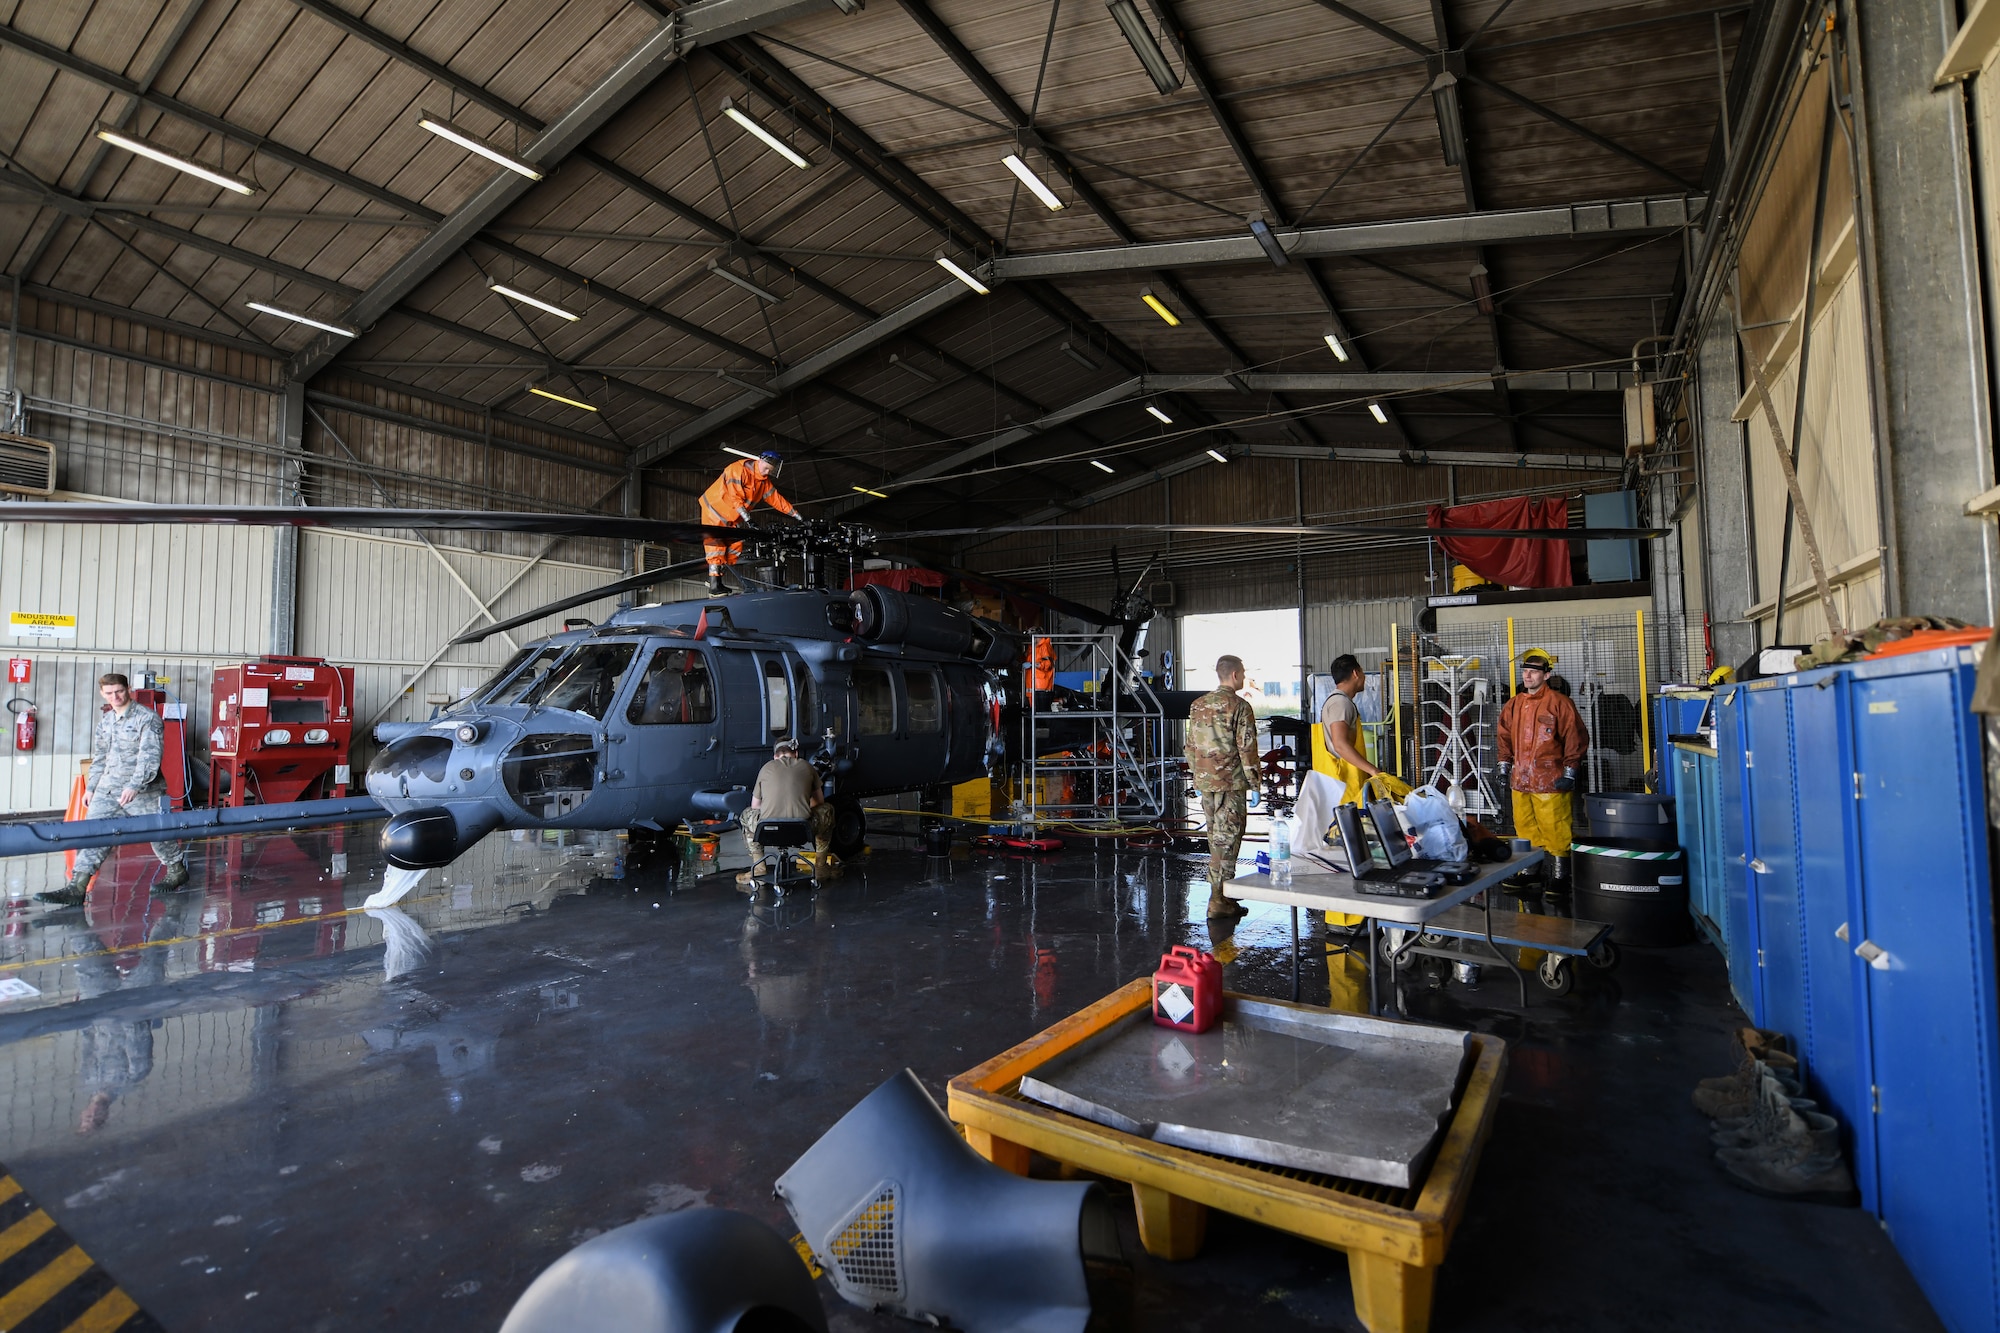 U.S Airmen from the 31st Aircraft Maintenance Squadron, 56th Helicopter Maintenance Unit, wash an HH-60G Pave Hawk helicopter at Aviano Air Base, Italy, Oct. 22, 2019. The primary mission of the HH-60G Pave Hawk helicopter is to conduct day or night personnel recovery operations out of hostile environments. (U.S. Air Force photo by Airman 1st Class Ericka A. Woolever).